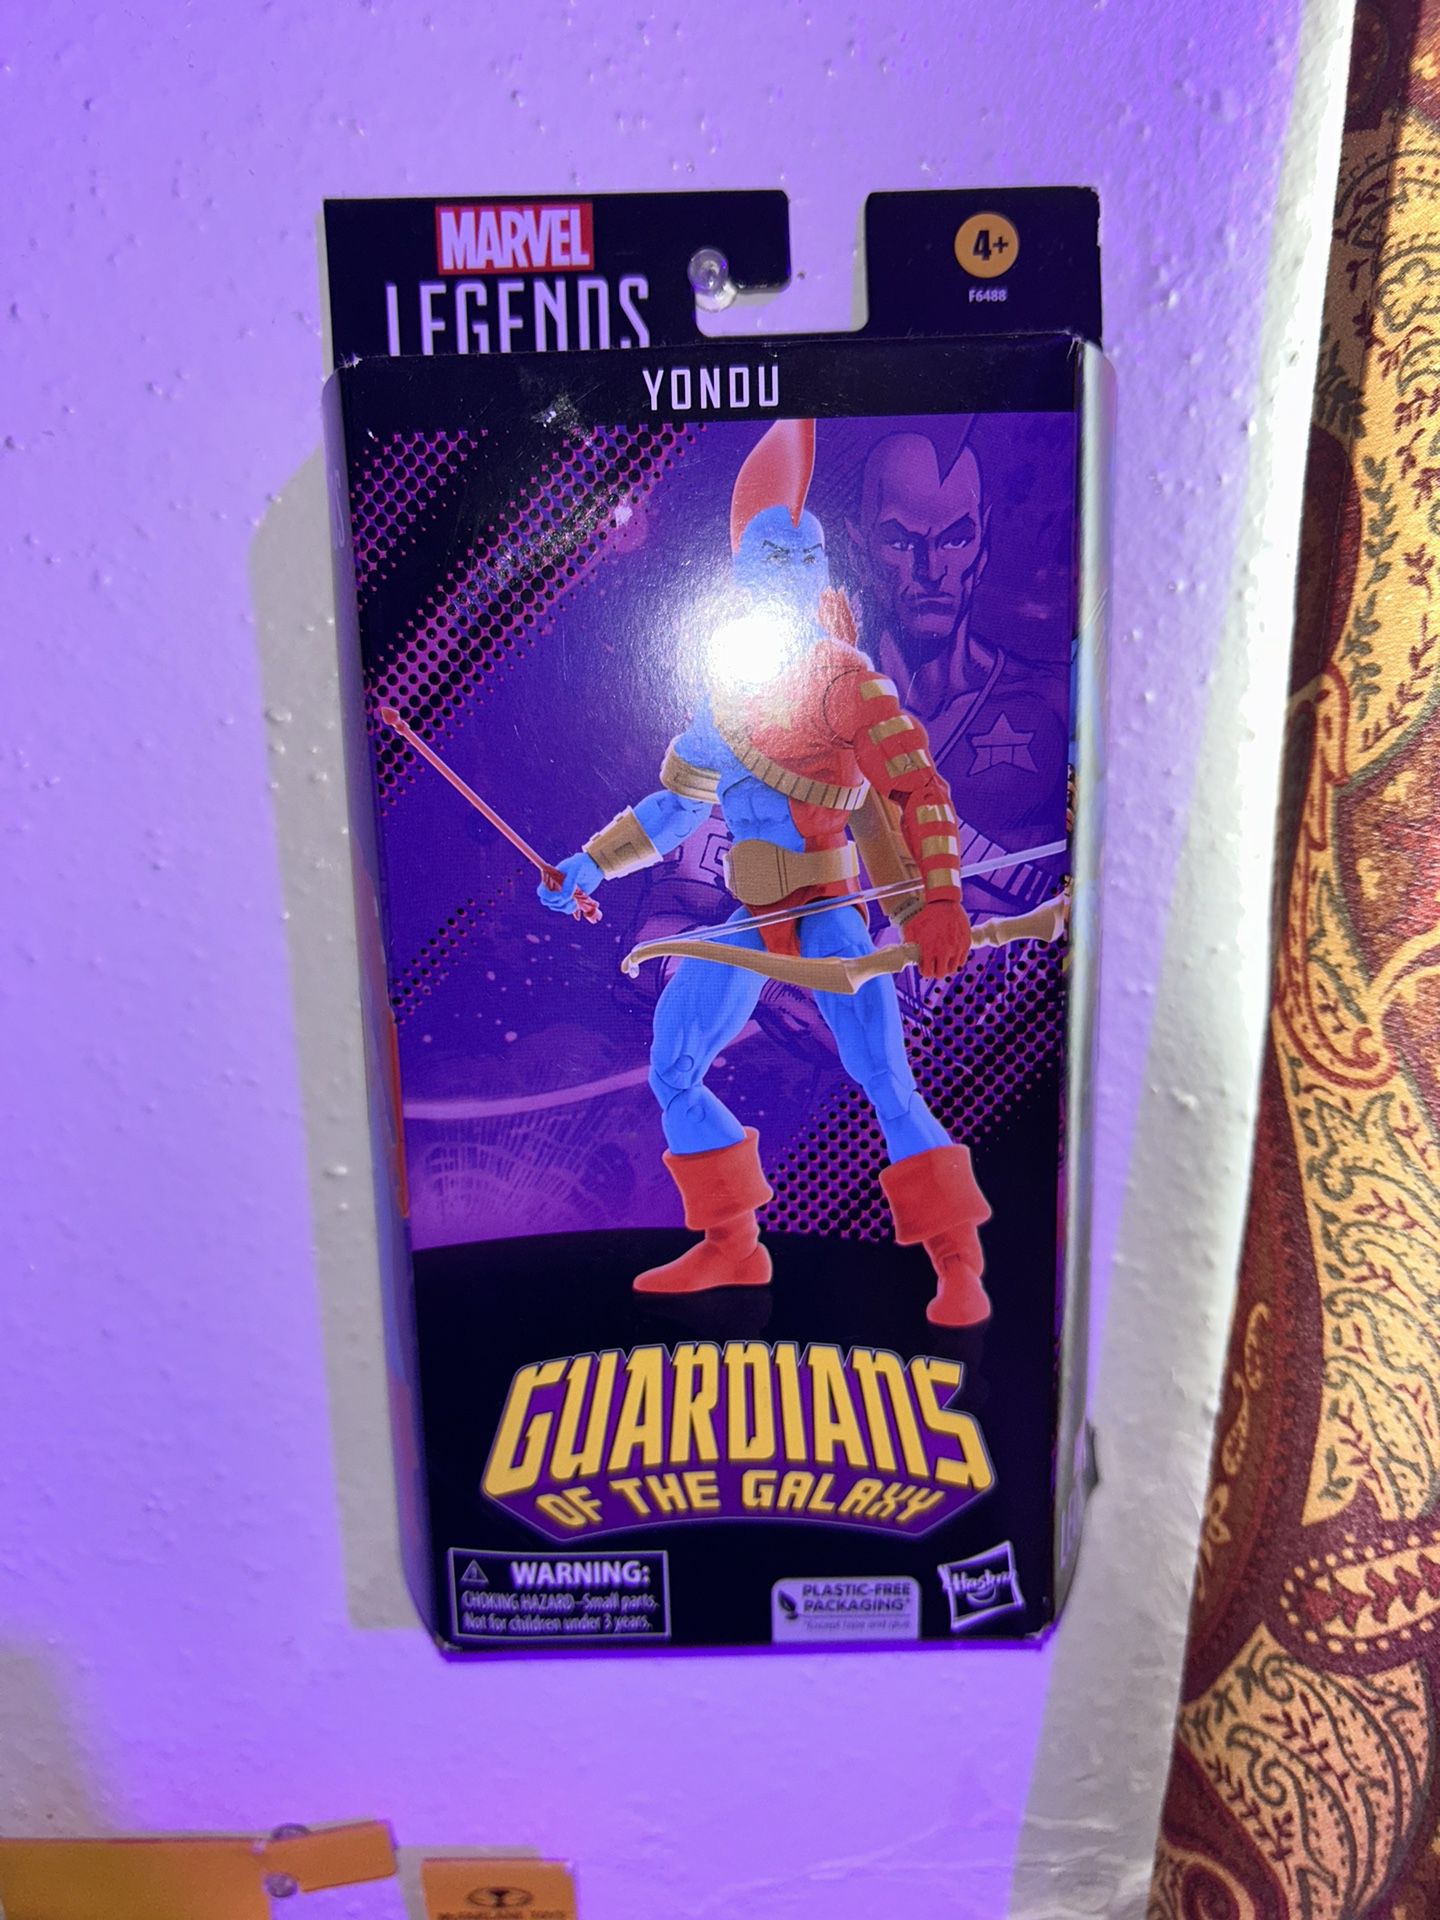 Marvel Legends Guardians Of The Galaxy YONDU 6” Target Exclusive - NEW SEALED!